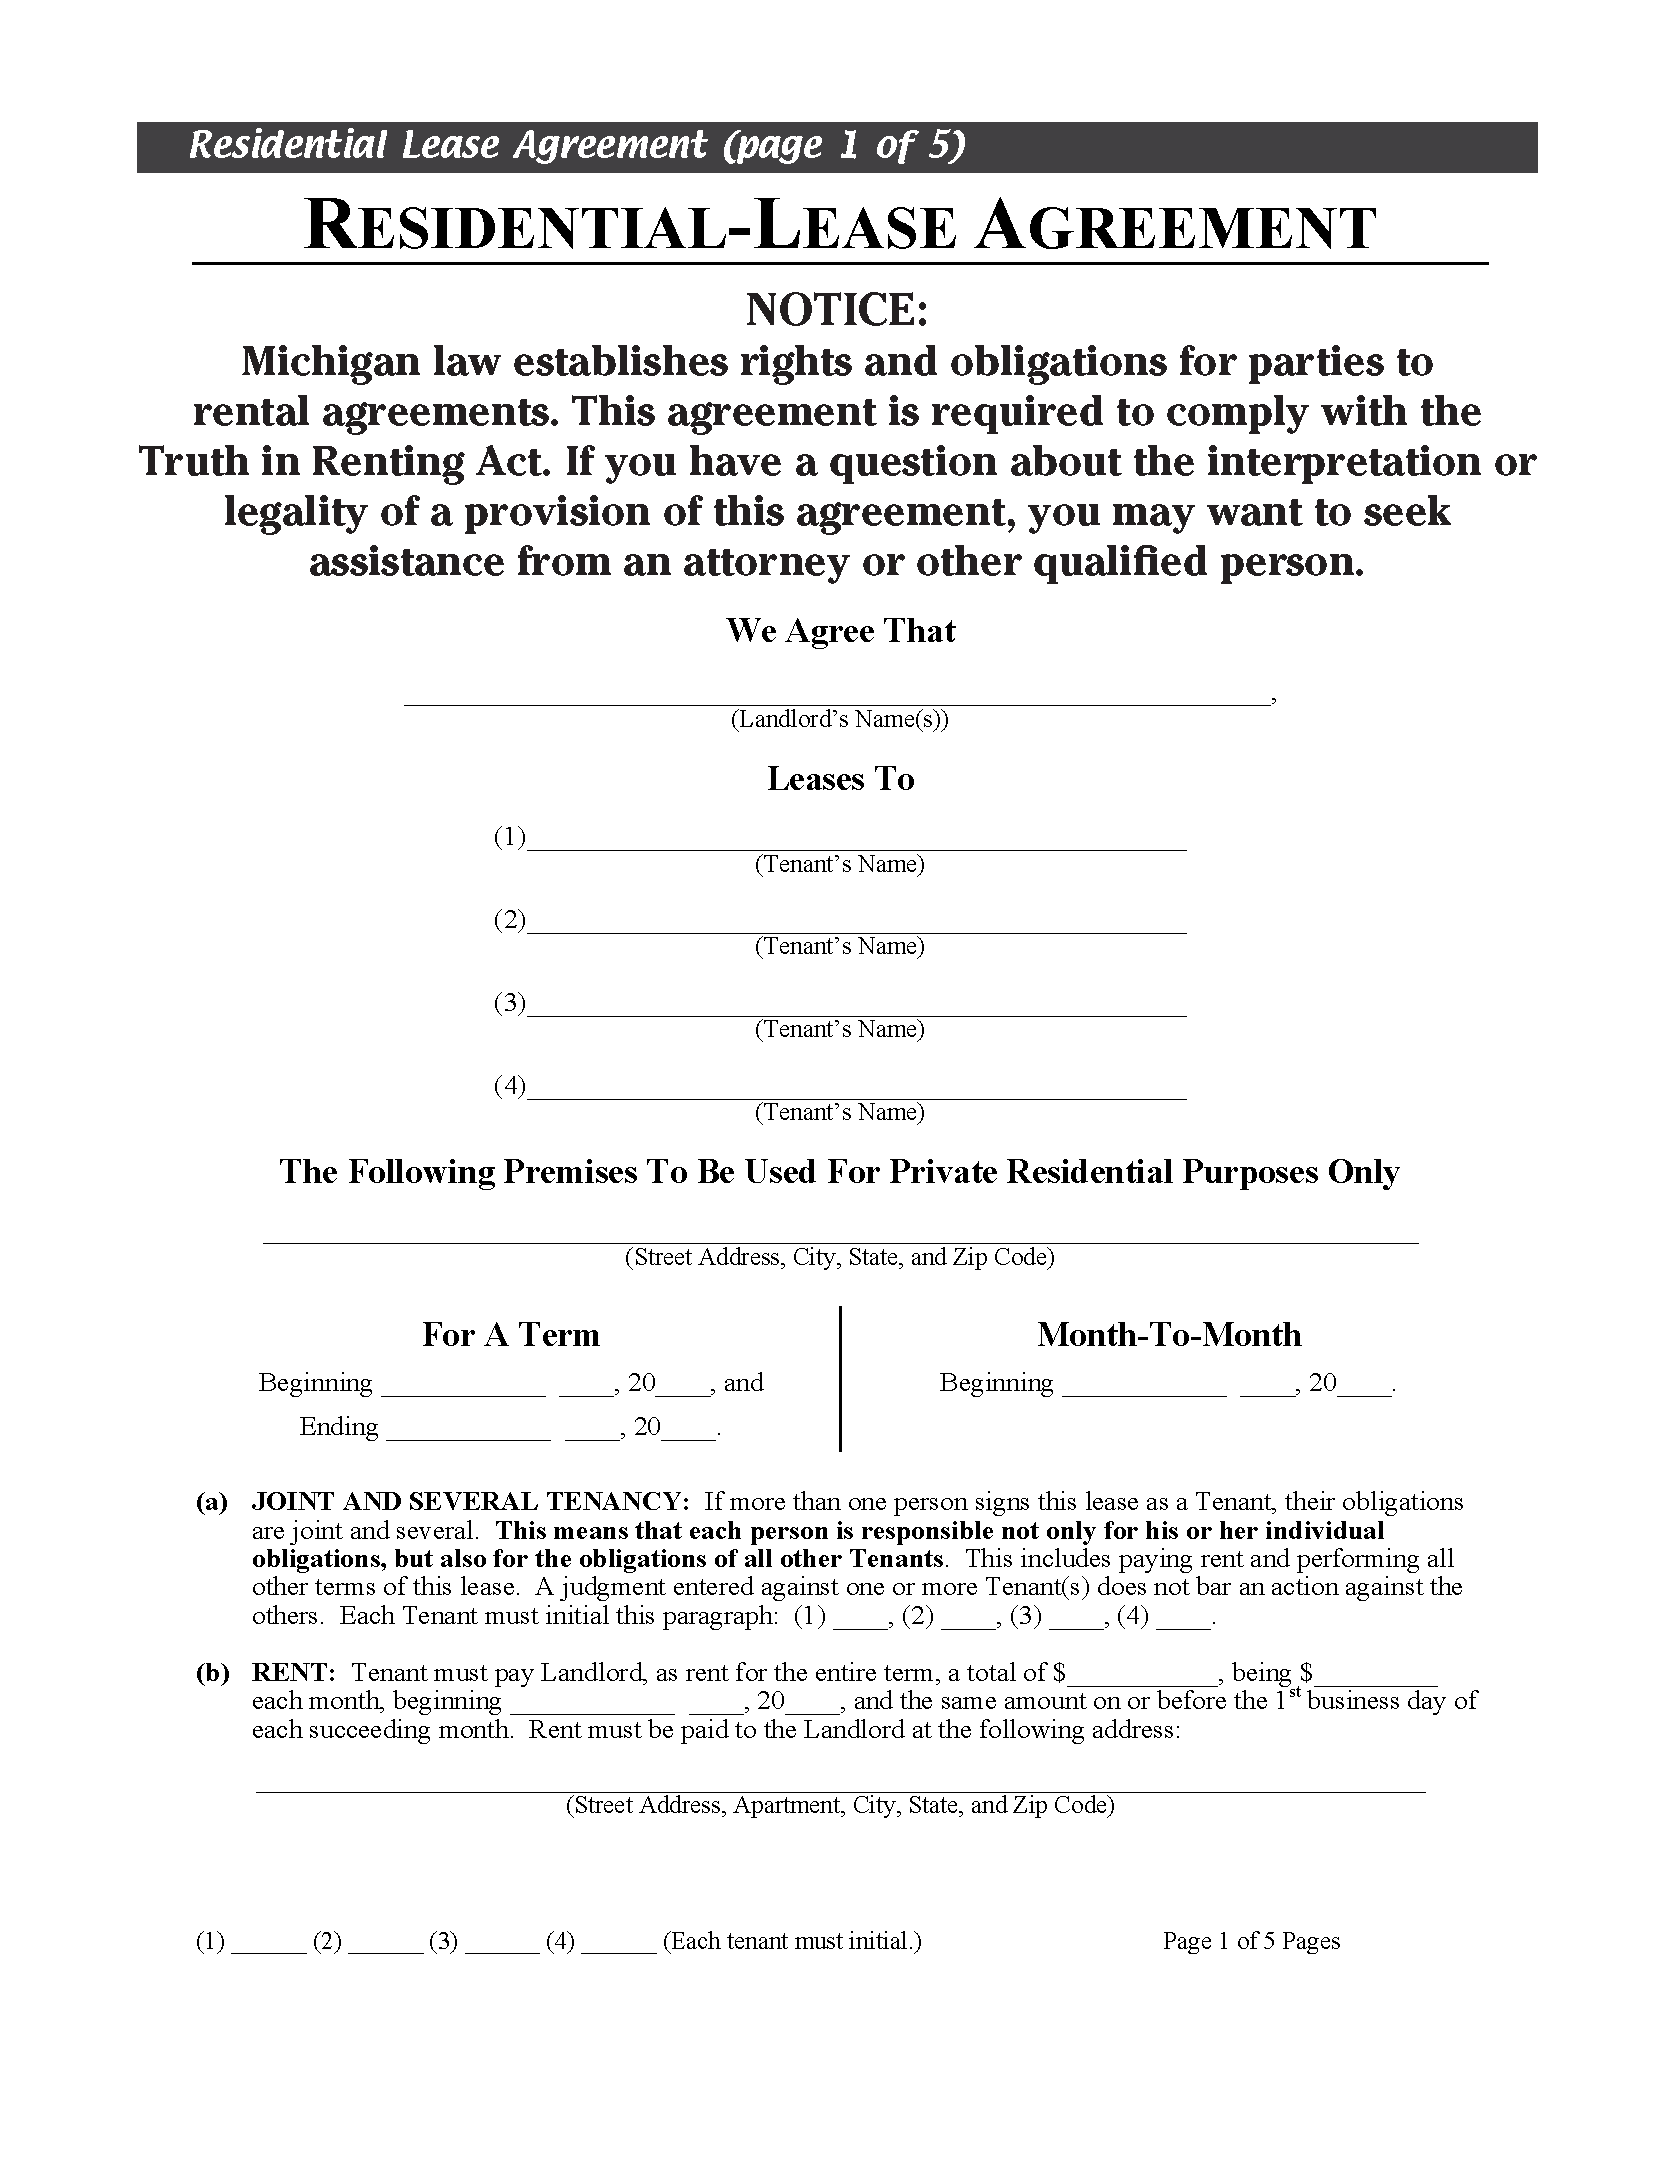 Standard Michigan Residential Lease Agreement Printable Form